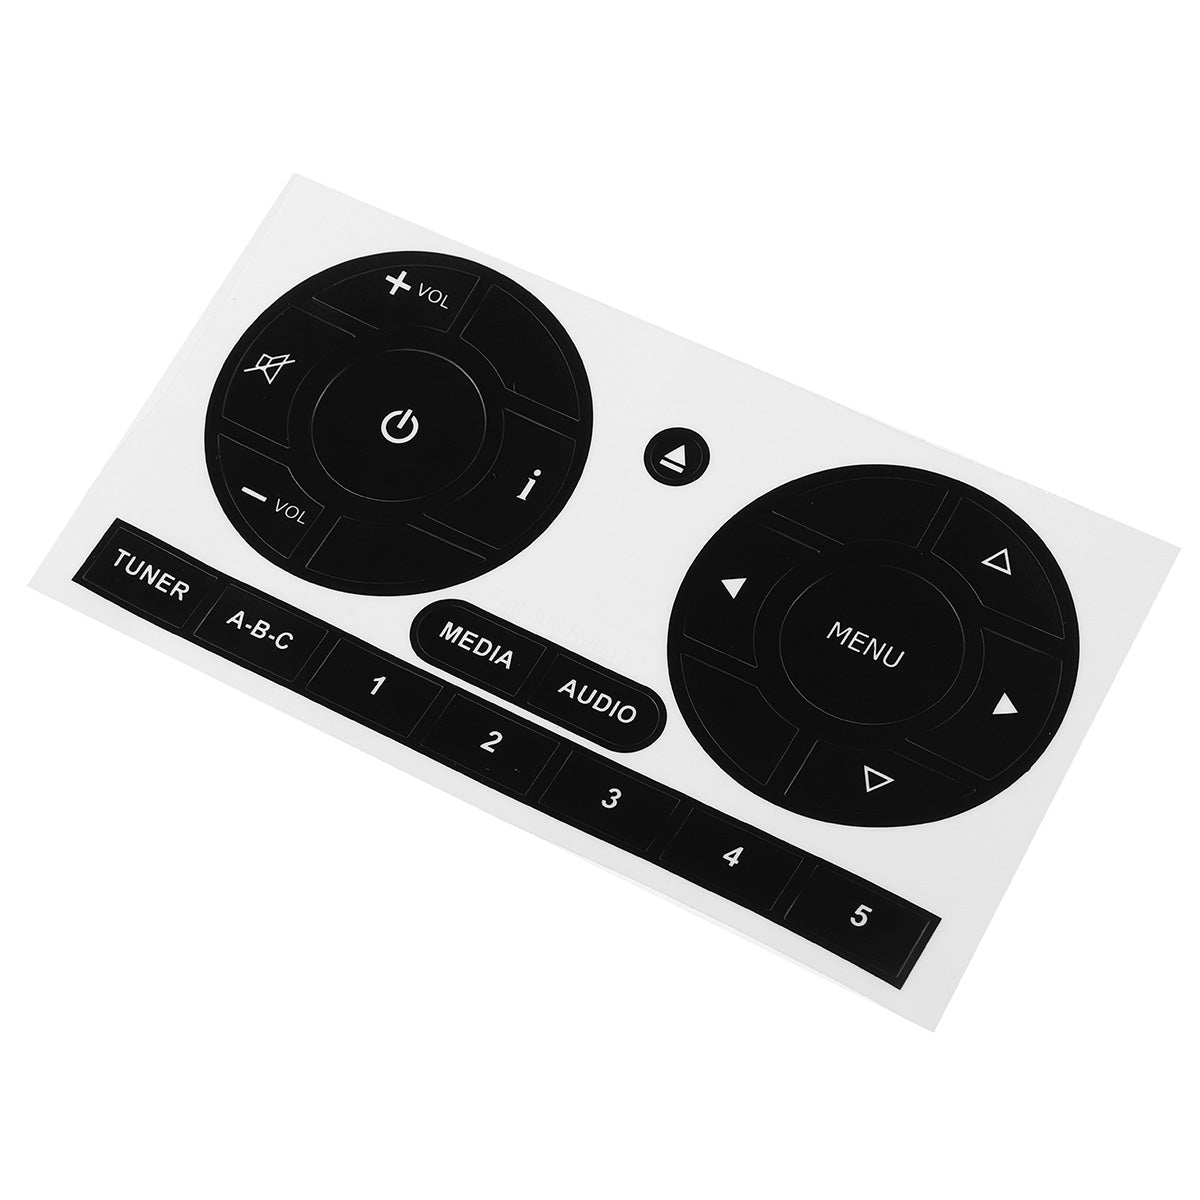 Black Car Radio Stereo Button Decals Worn Peeling Repair Stickers For Fiat 500